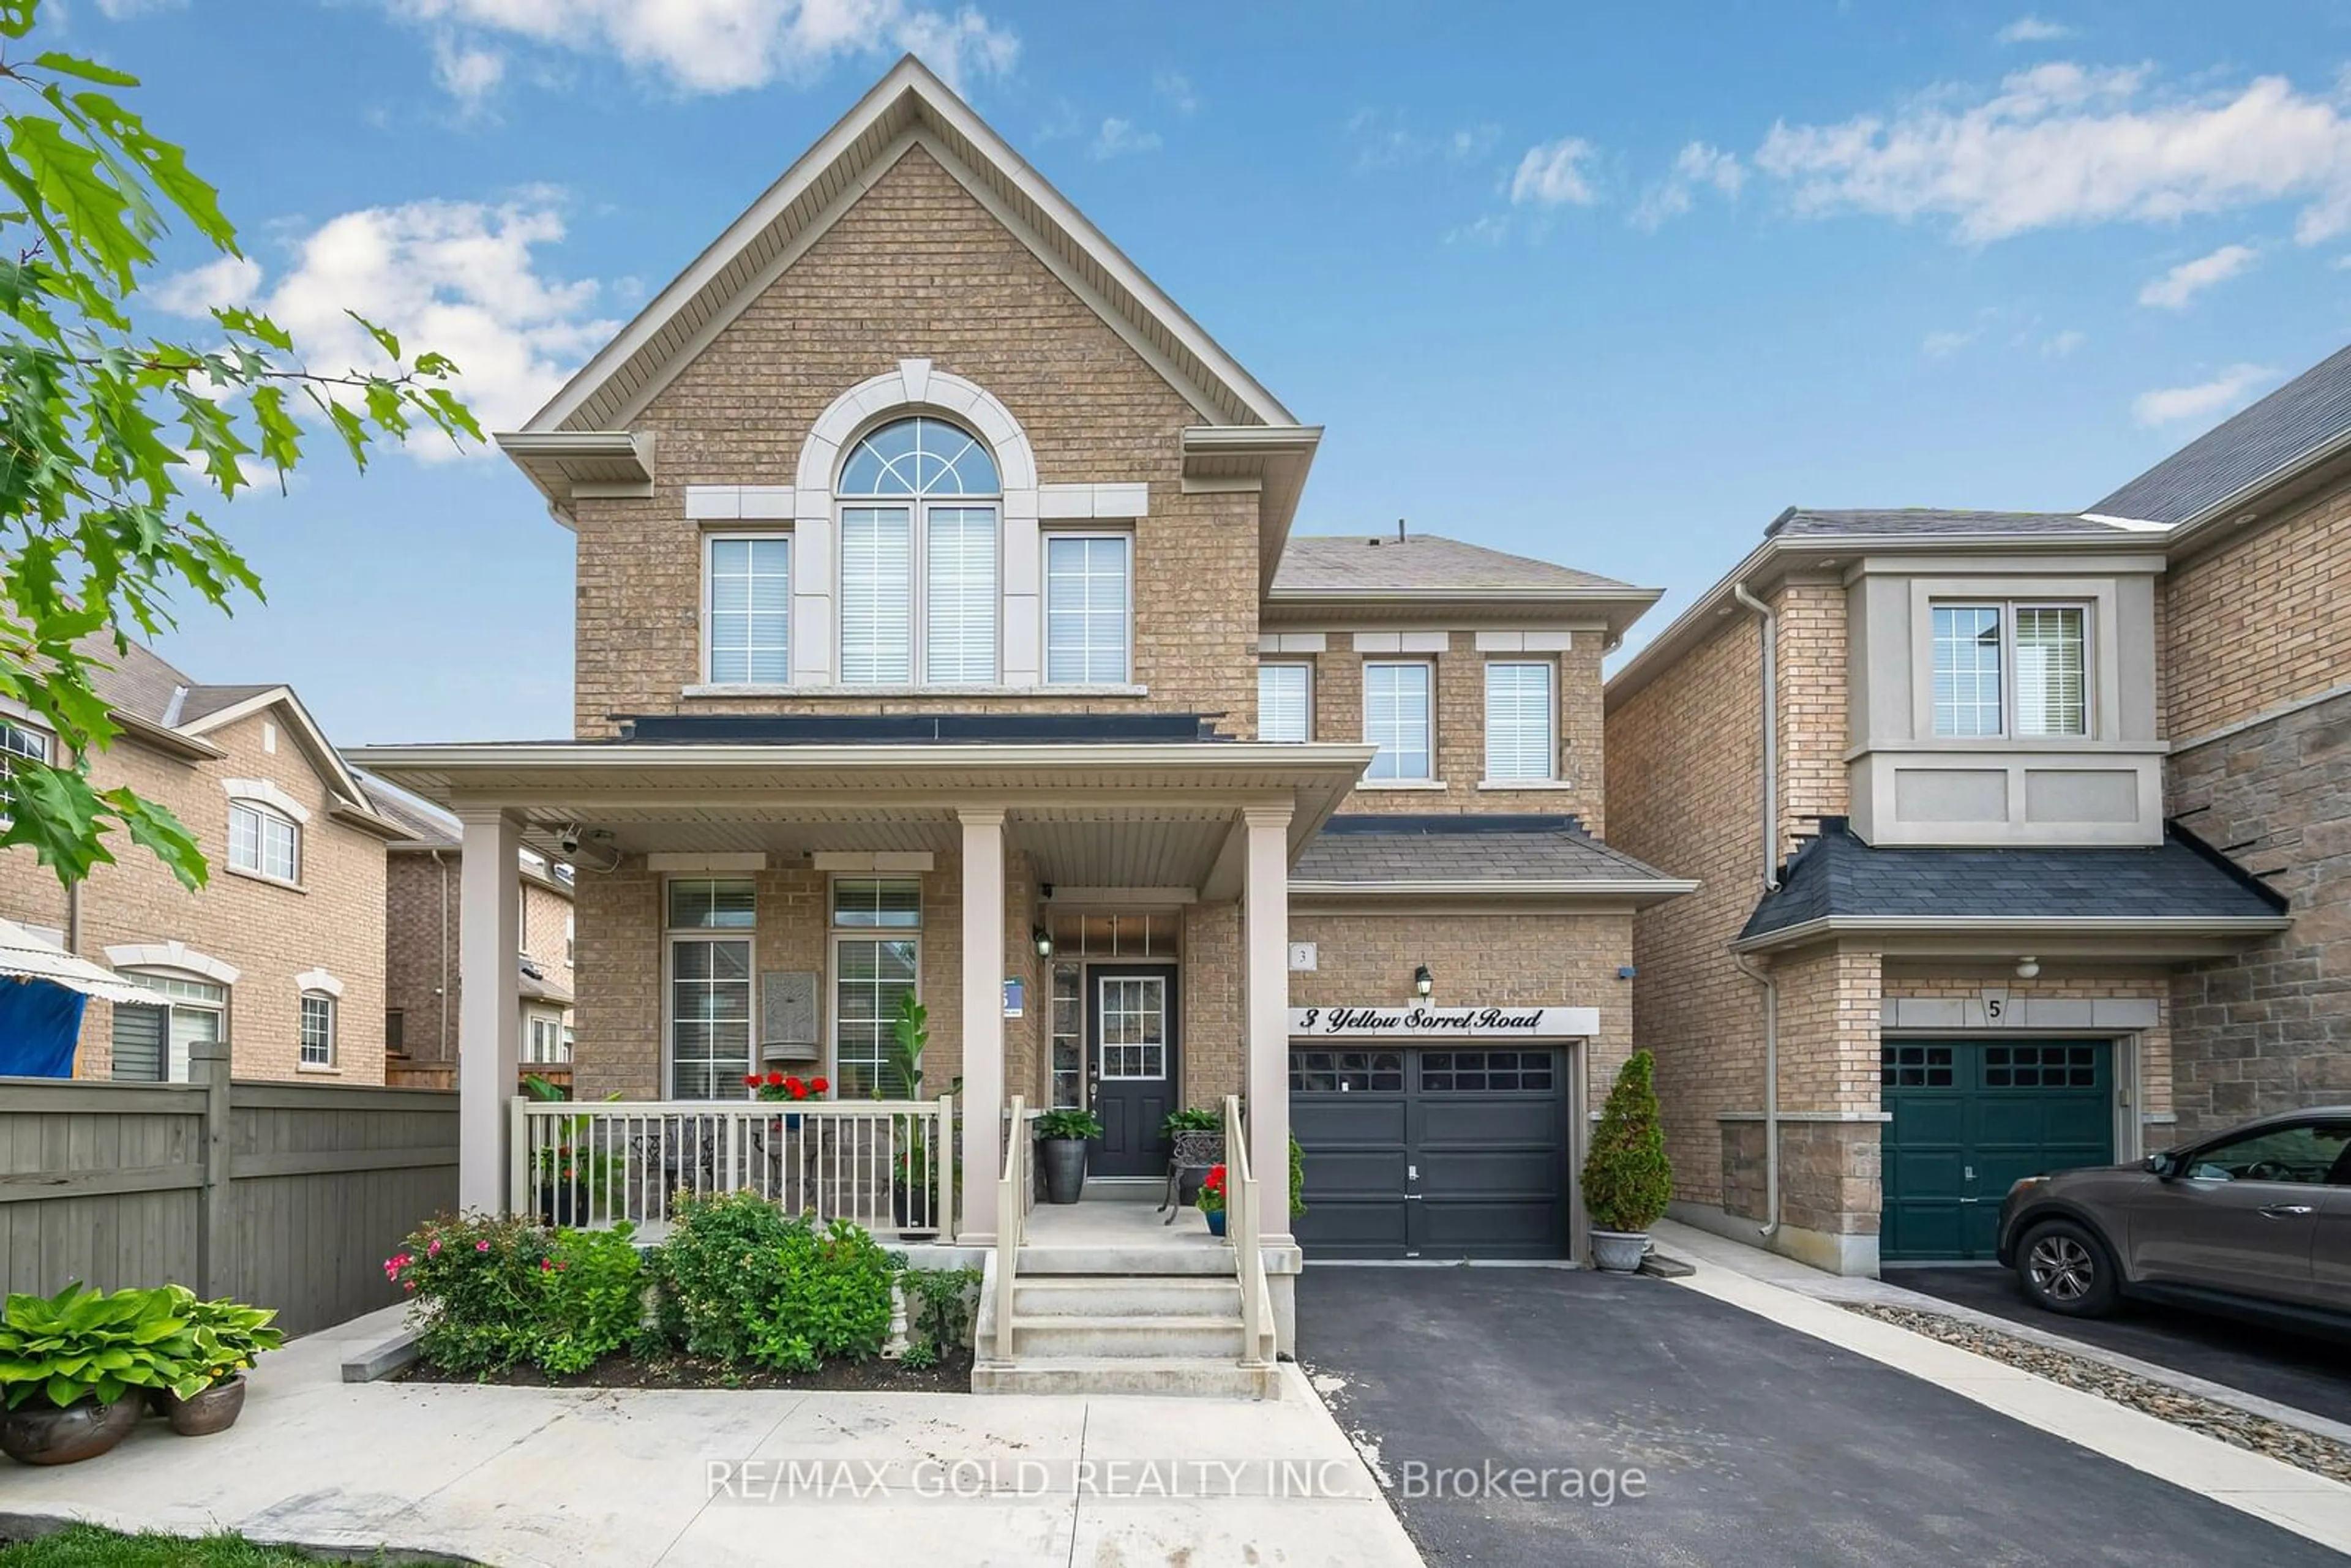 Home with brick exterior material for 3 Yellow Sorrel Rd, Brampton Ontario L6R 3V8